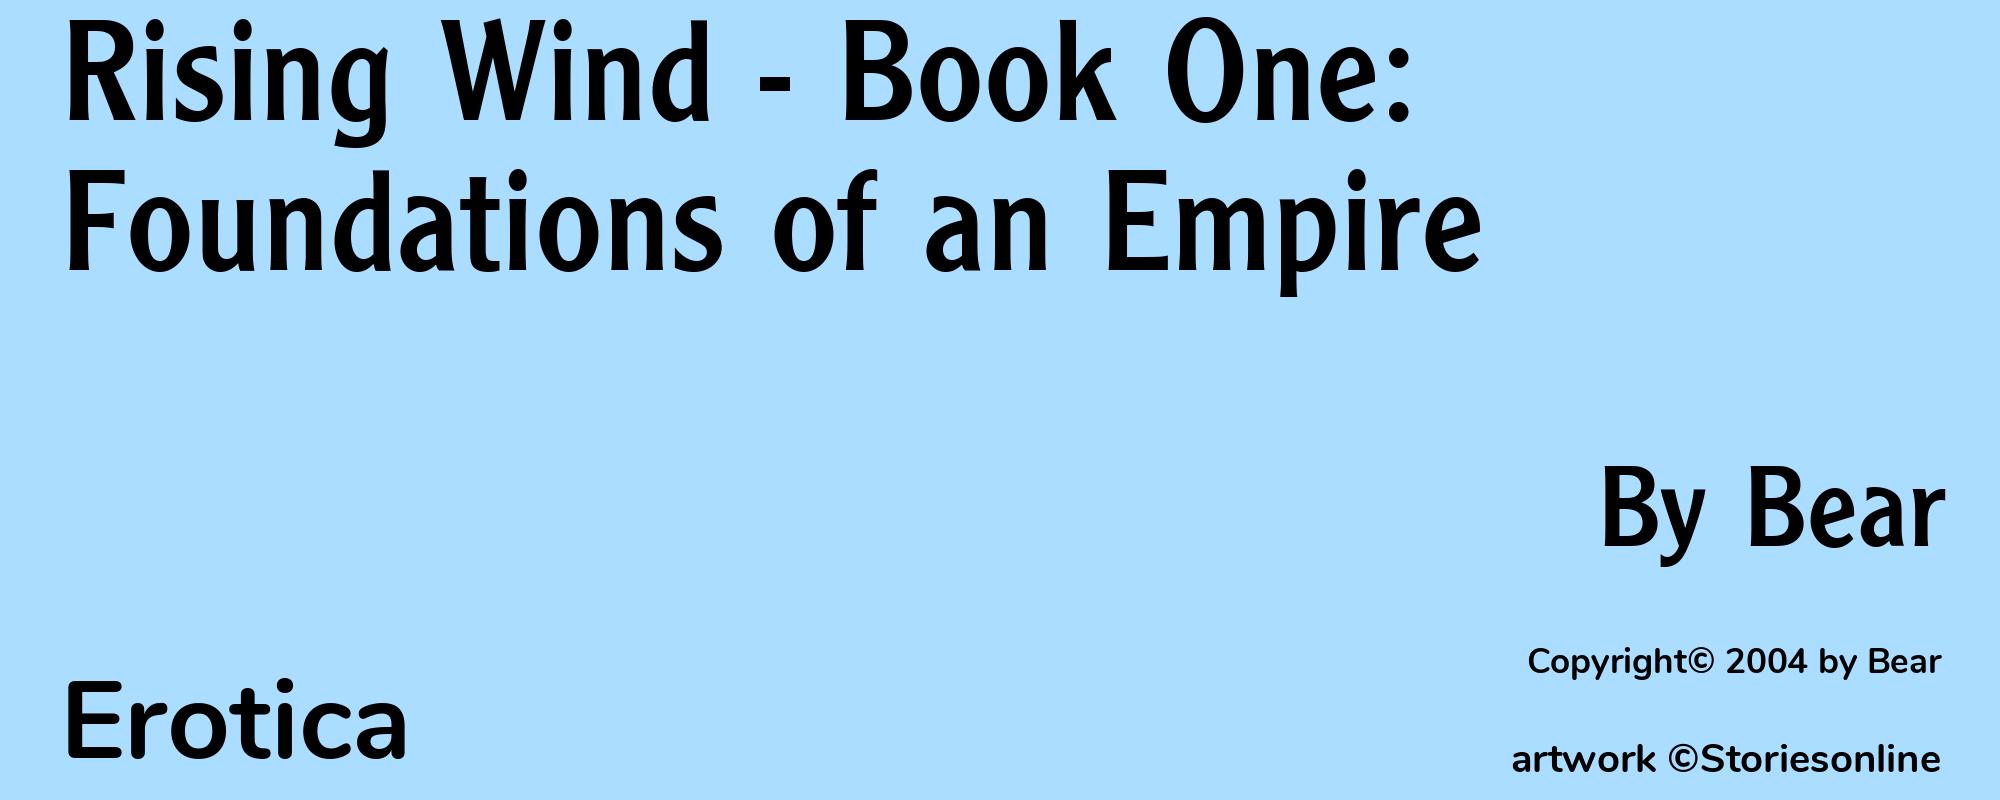 Rising Wind - Book One: Foundations of an Empire - Cover